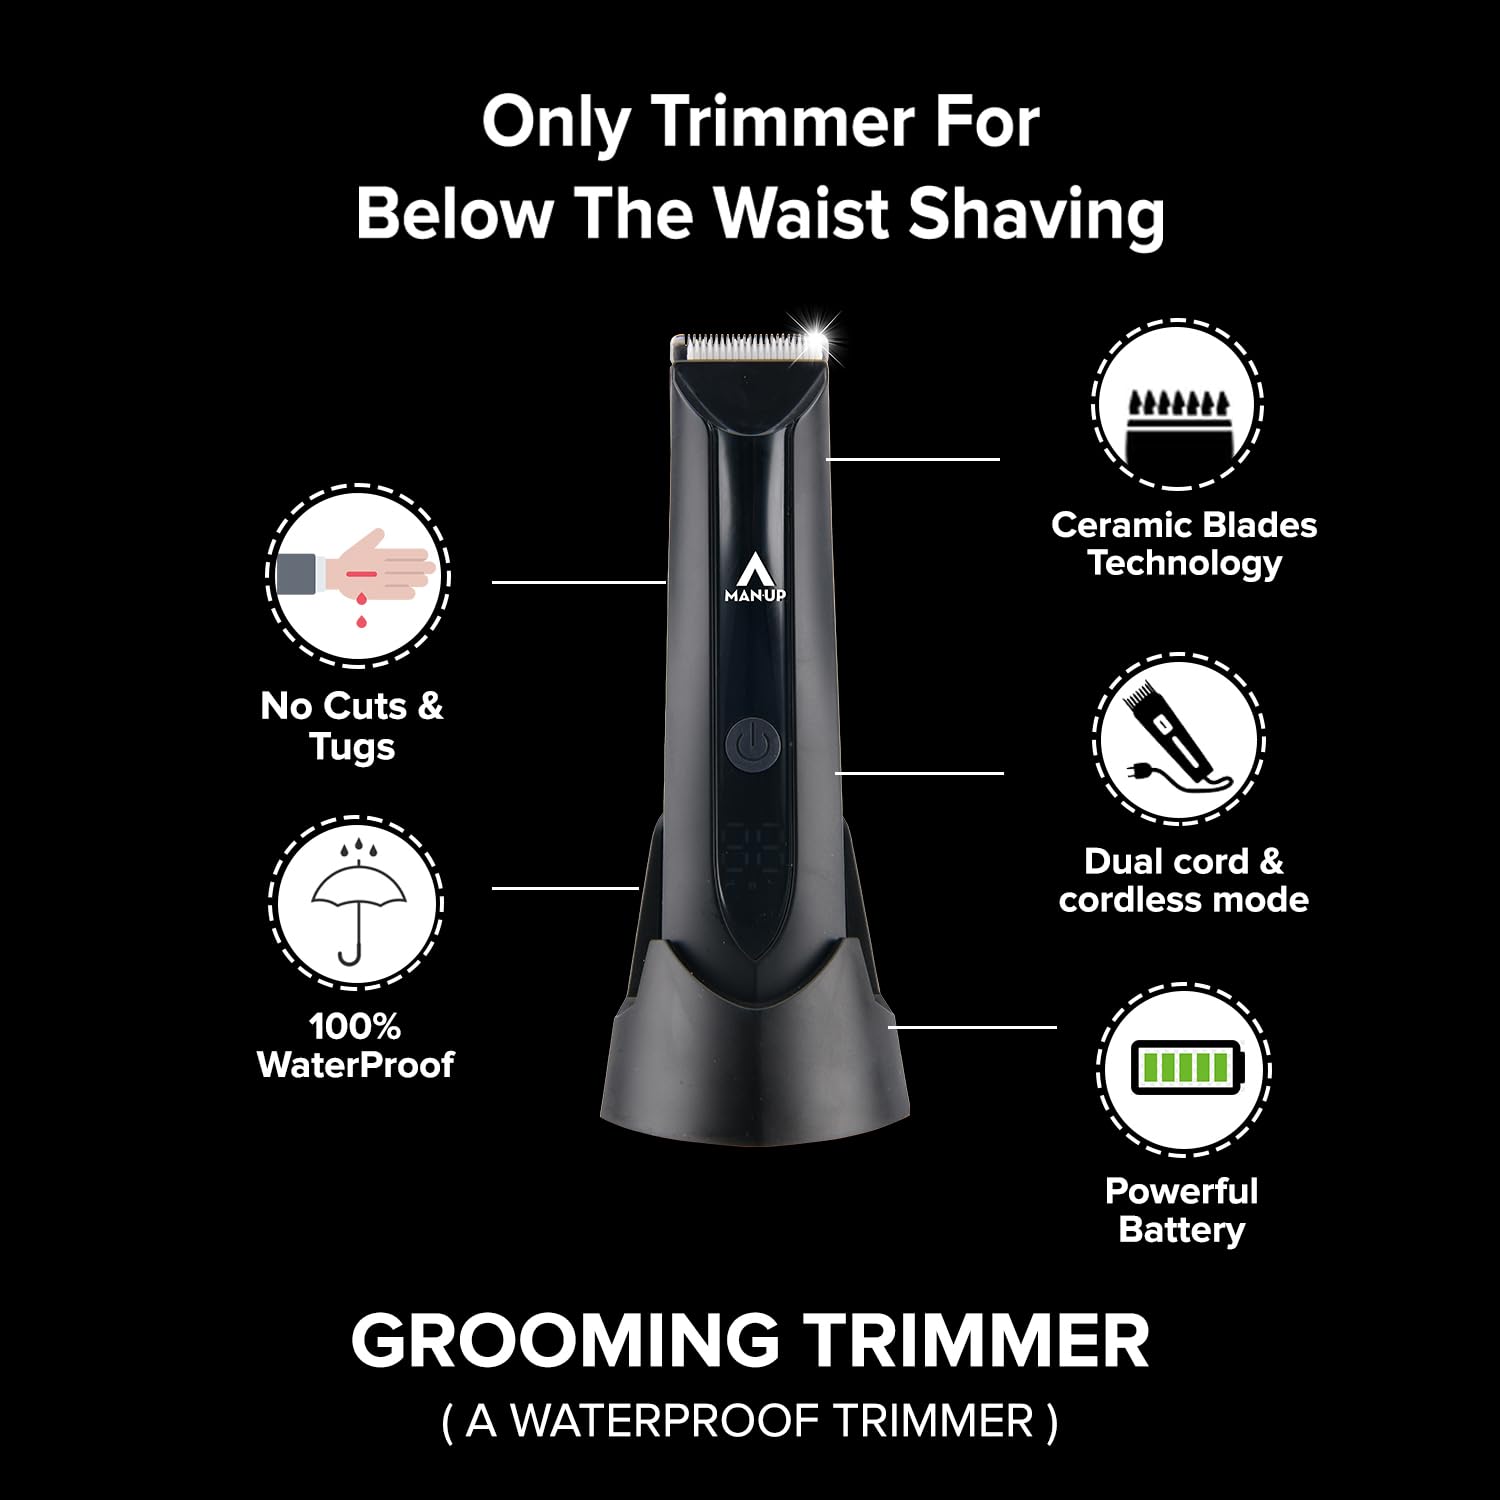 Electric Body Hair Trimmer and Shaver for Men VIKICON Body Groomer for  GroinBall wLighting Pubic